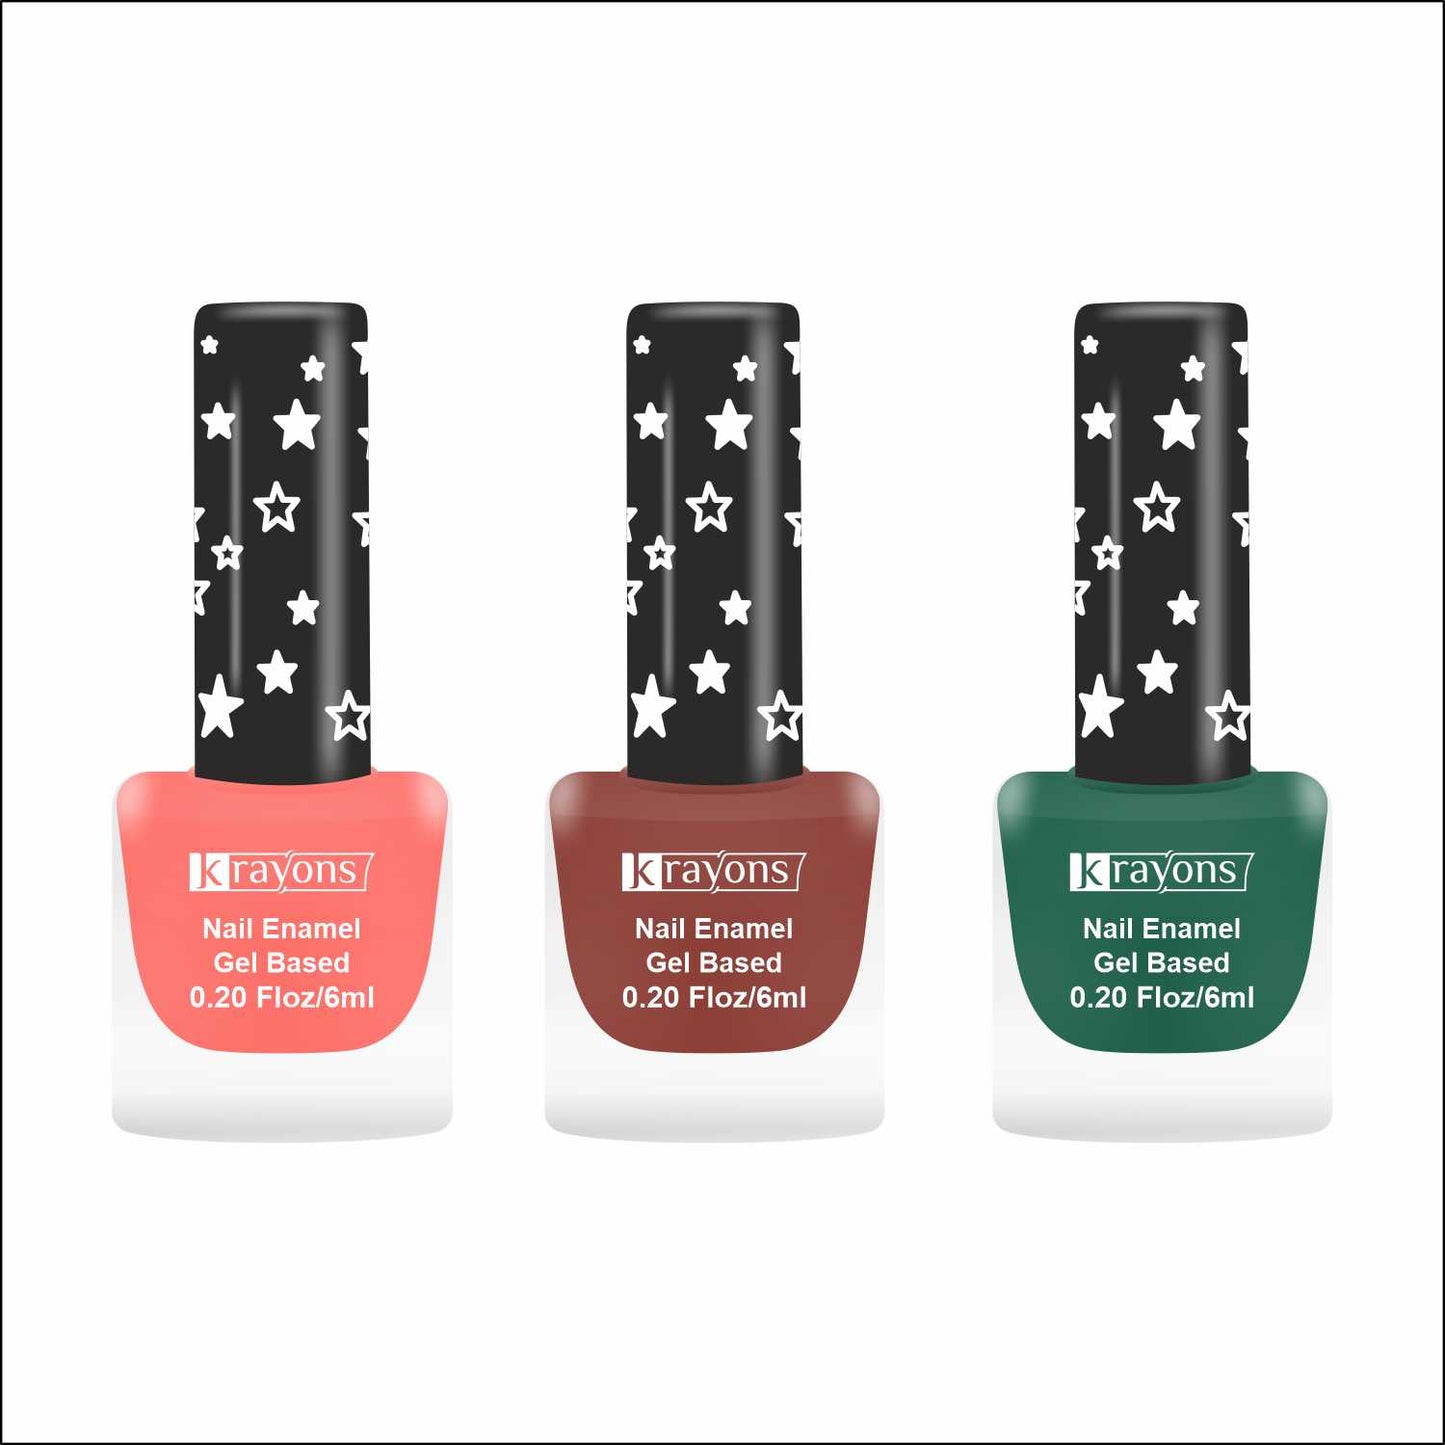 Krayons Cute Super Matte Finish Nail Enamel, Quick Dry, LongLasting, Blossom Peach, Chestnut Matte, Forest Green, 6ml Each (Pack of 3)